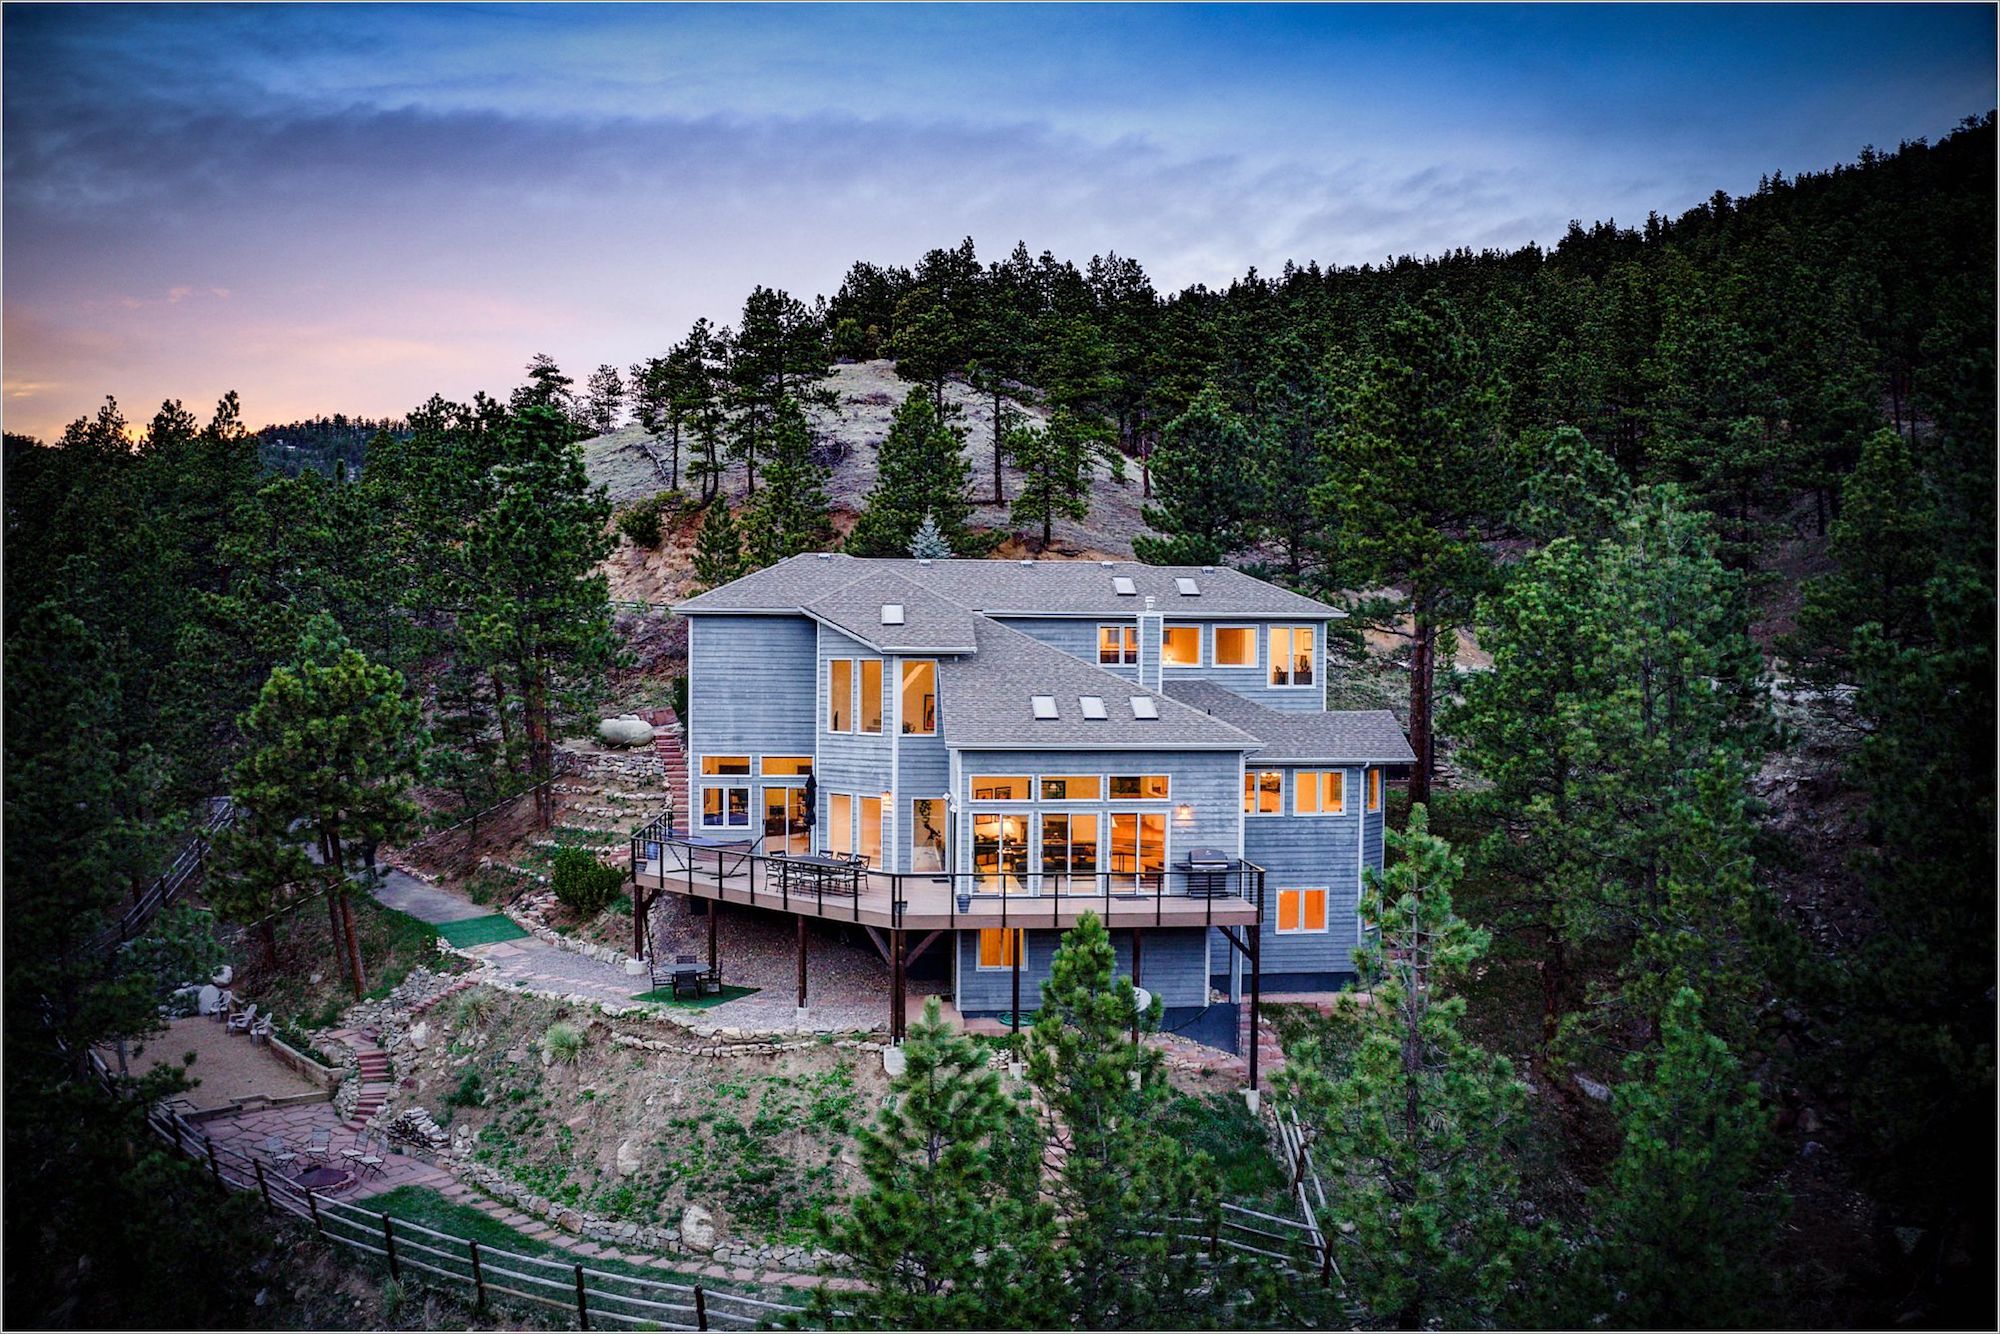 A mountain home built into the side of a hill at dusk